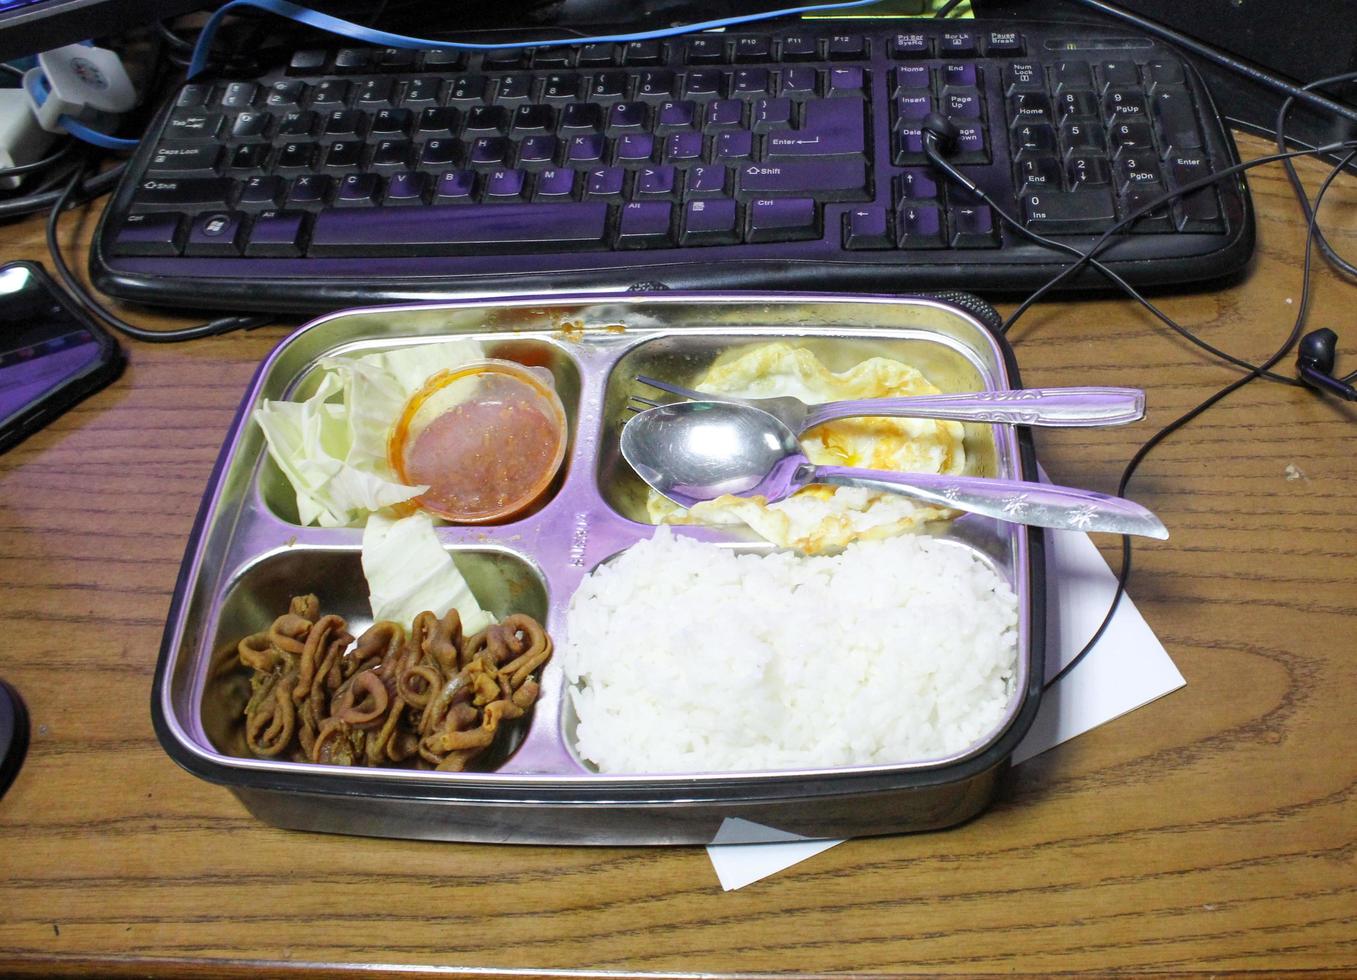 Eating at work place with lunch box in front of computer photo